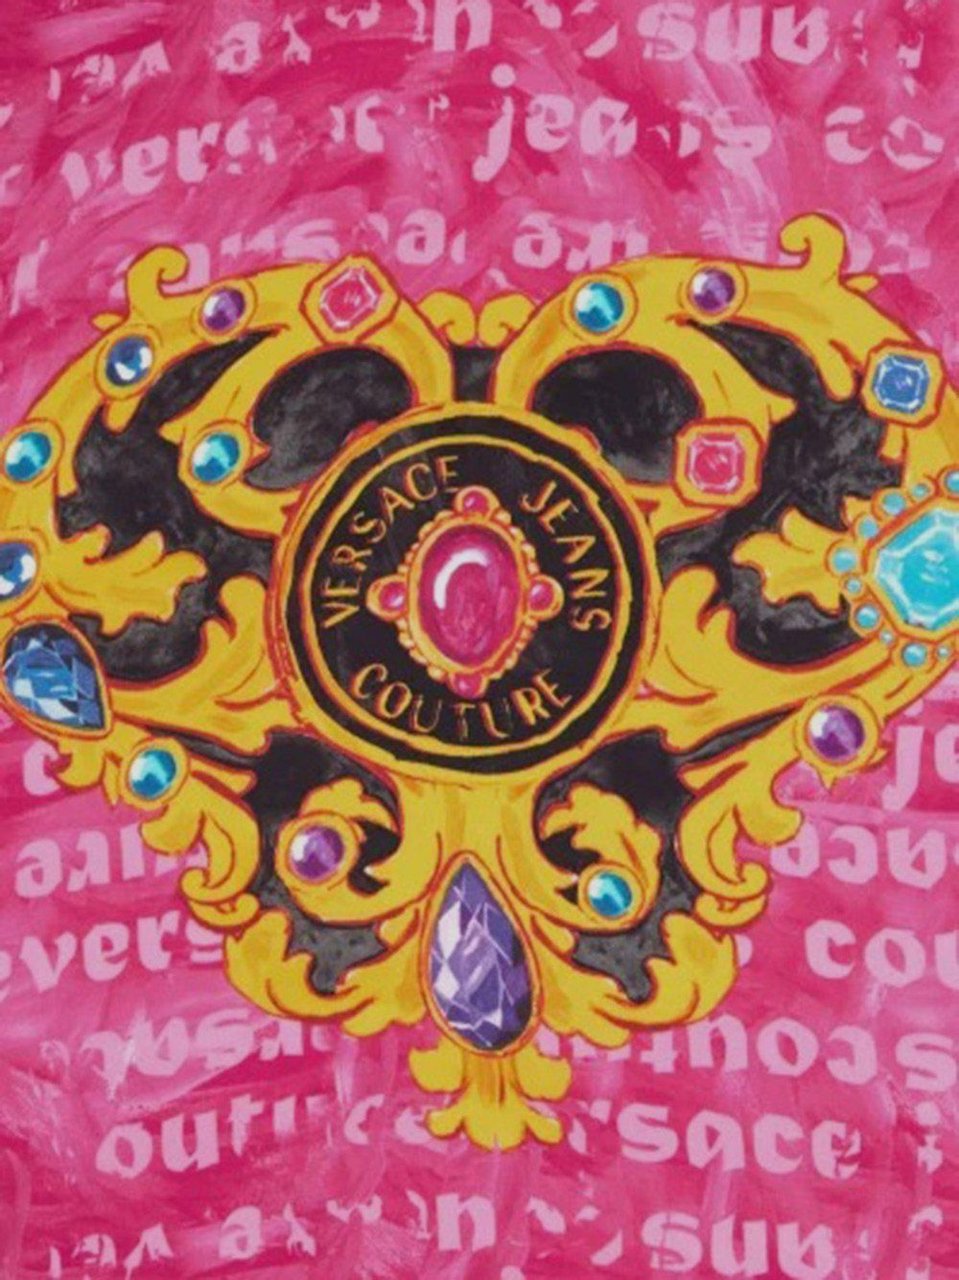 Versace Jeans Couture Baroque Foulard Divers